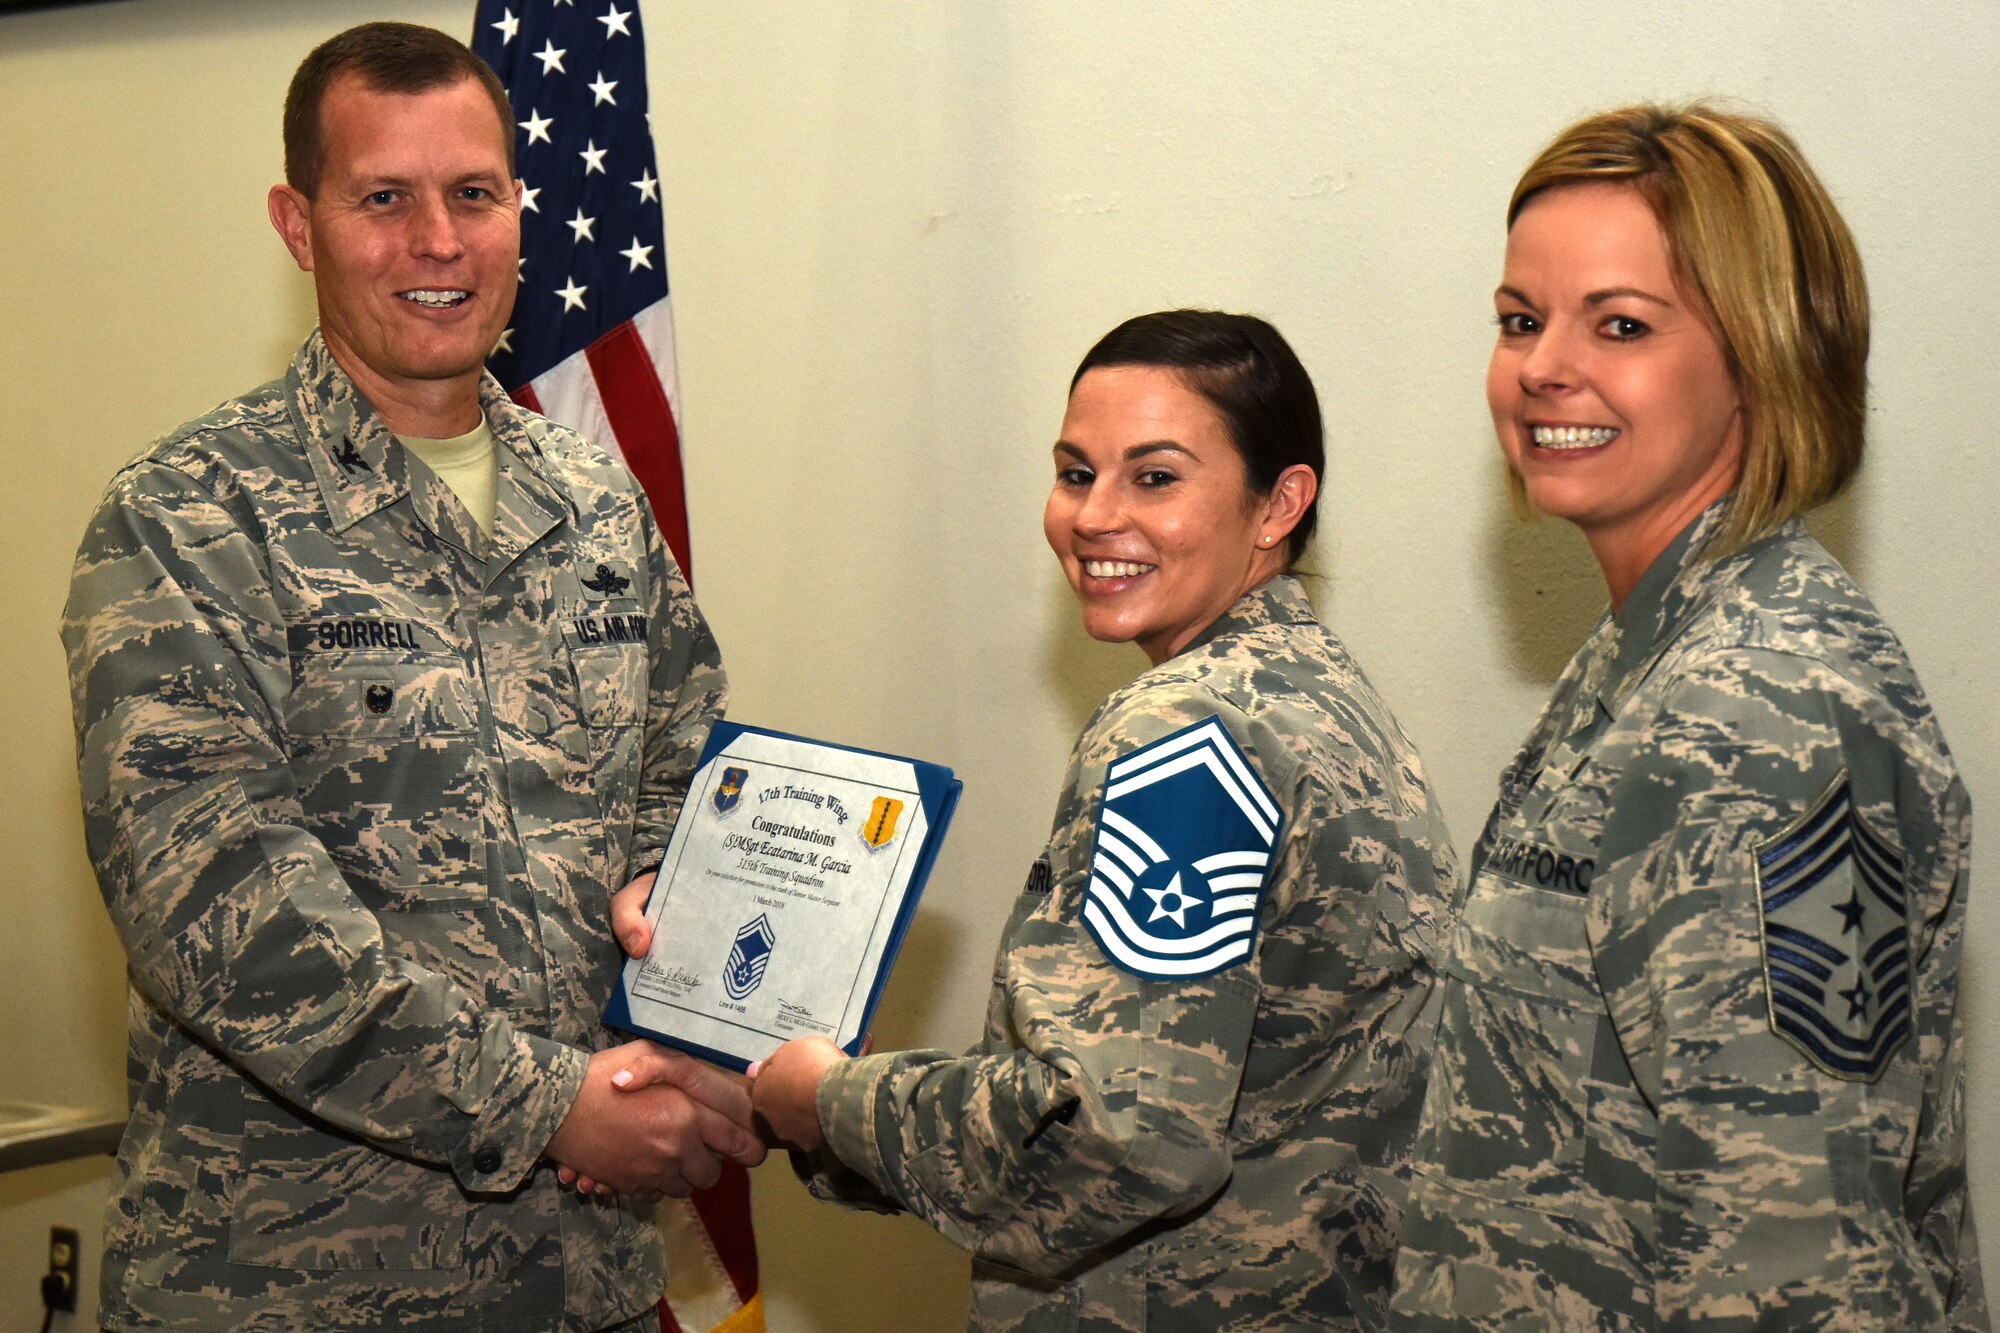 U.S. Air Force Col. Jeffrey Sorrell, 17th Training Wing vice commander, presents Master Sgt. Ecatarina Garcia, 315th Training Squadron instructor, a promotion certificate with Chief Master Sgt. Bobbie Reinsche, 17th Training Wing command chief, at the Event Center on Goodfellow Air Force Base, Texas, March 1, 2018. In celebration of individuals being selected for senior master sergeant, a party was held at the Event Center. (U.S. Air Force photo by Airman 1st Class Seraiah Hines/Released)